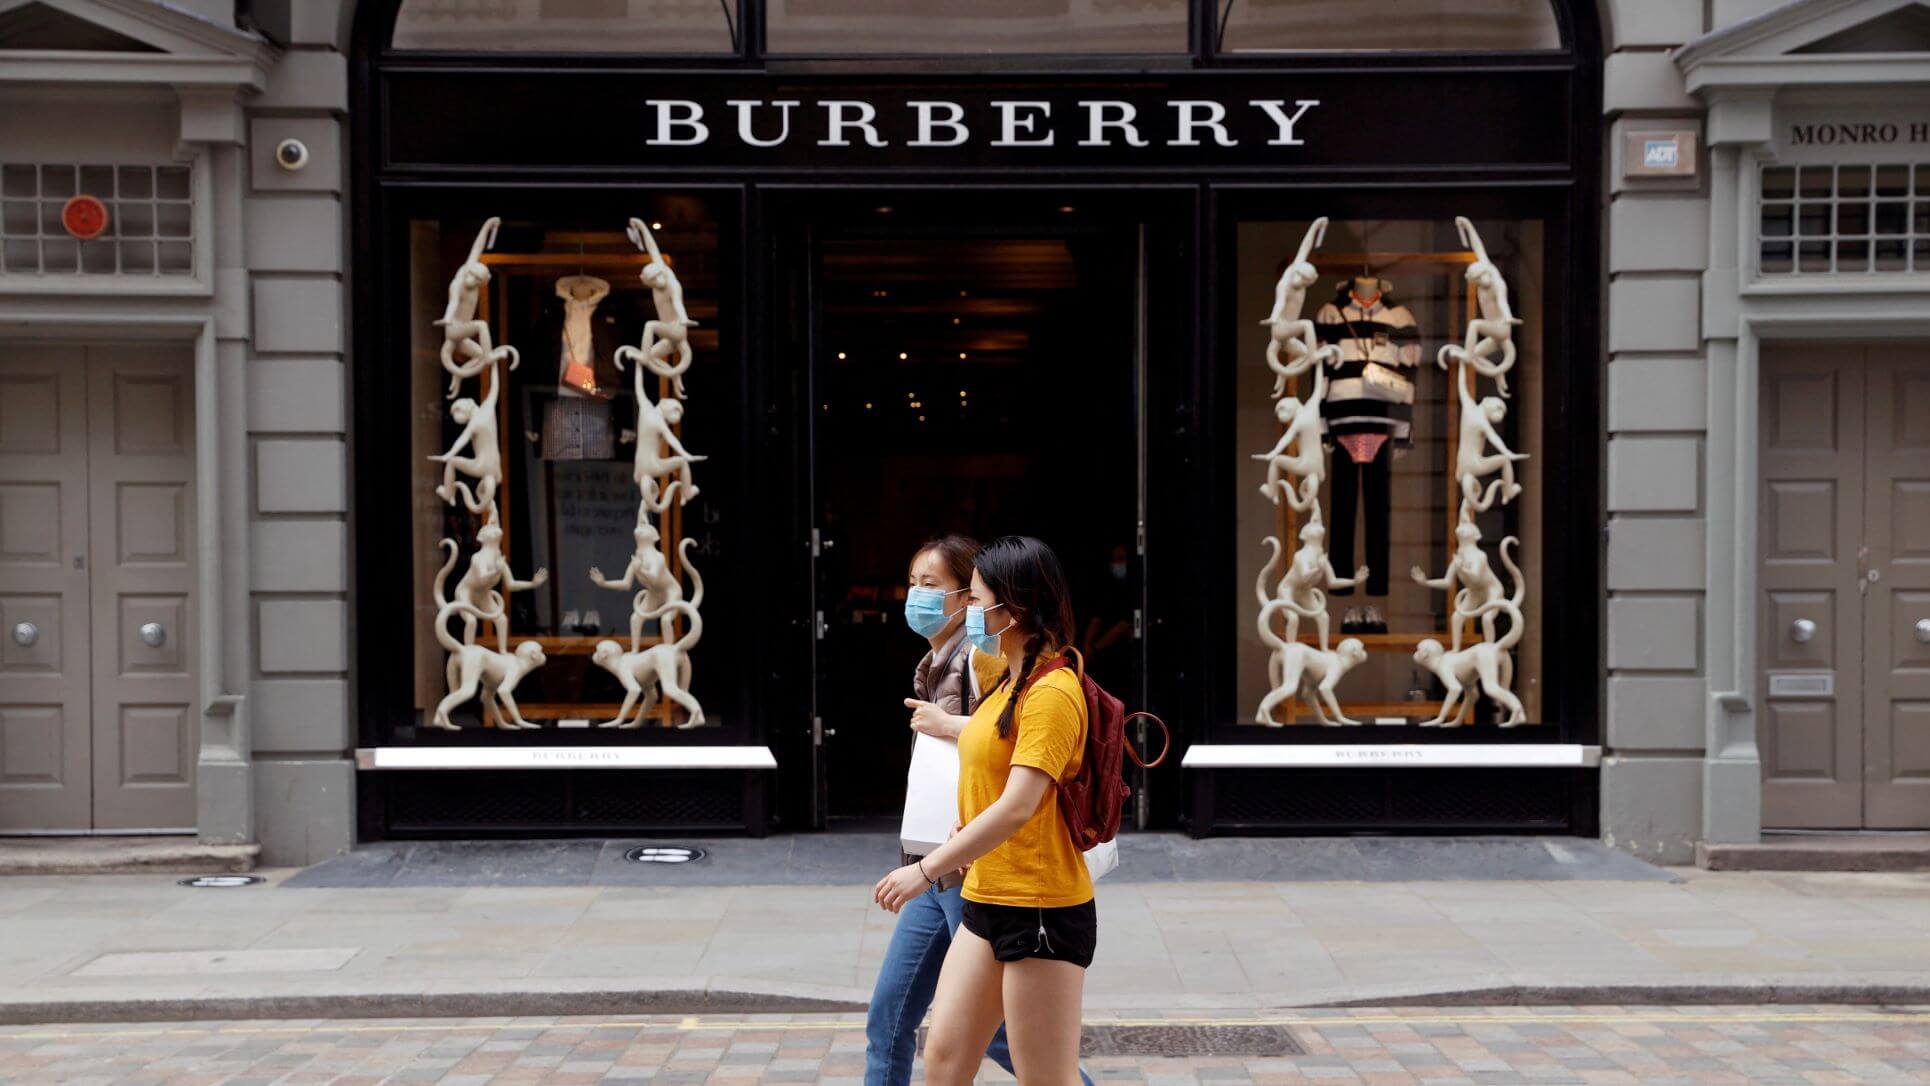 Burberry Focuses On 'Britishness' In New CEO's Growth Plan